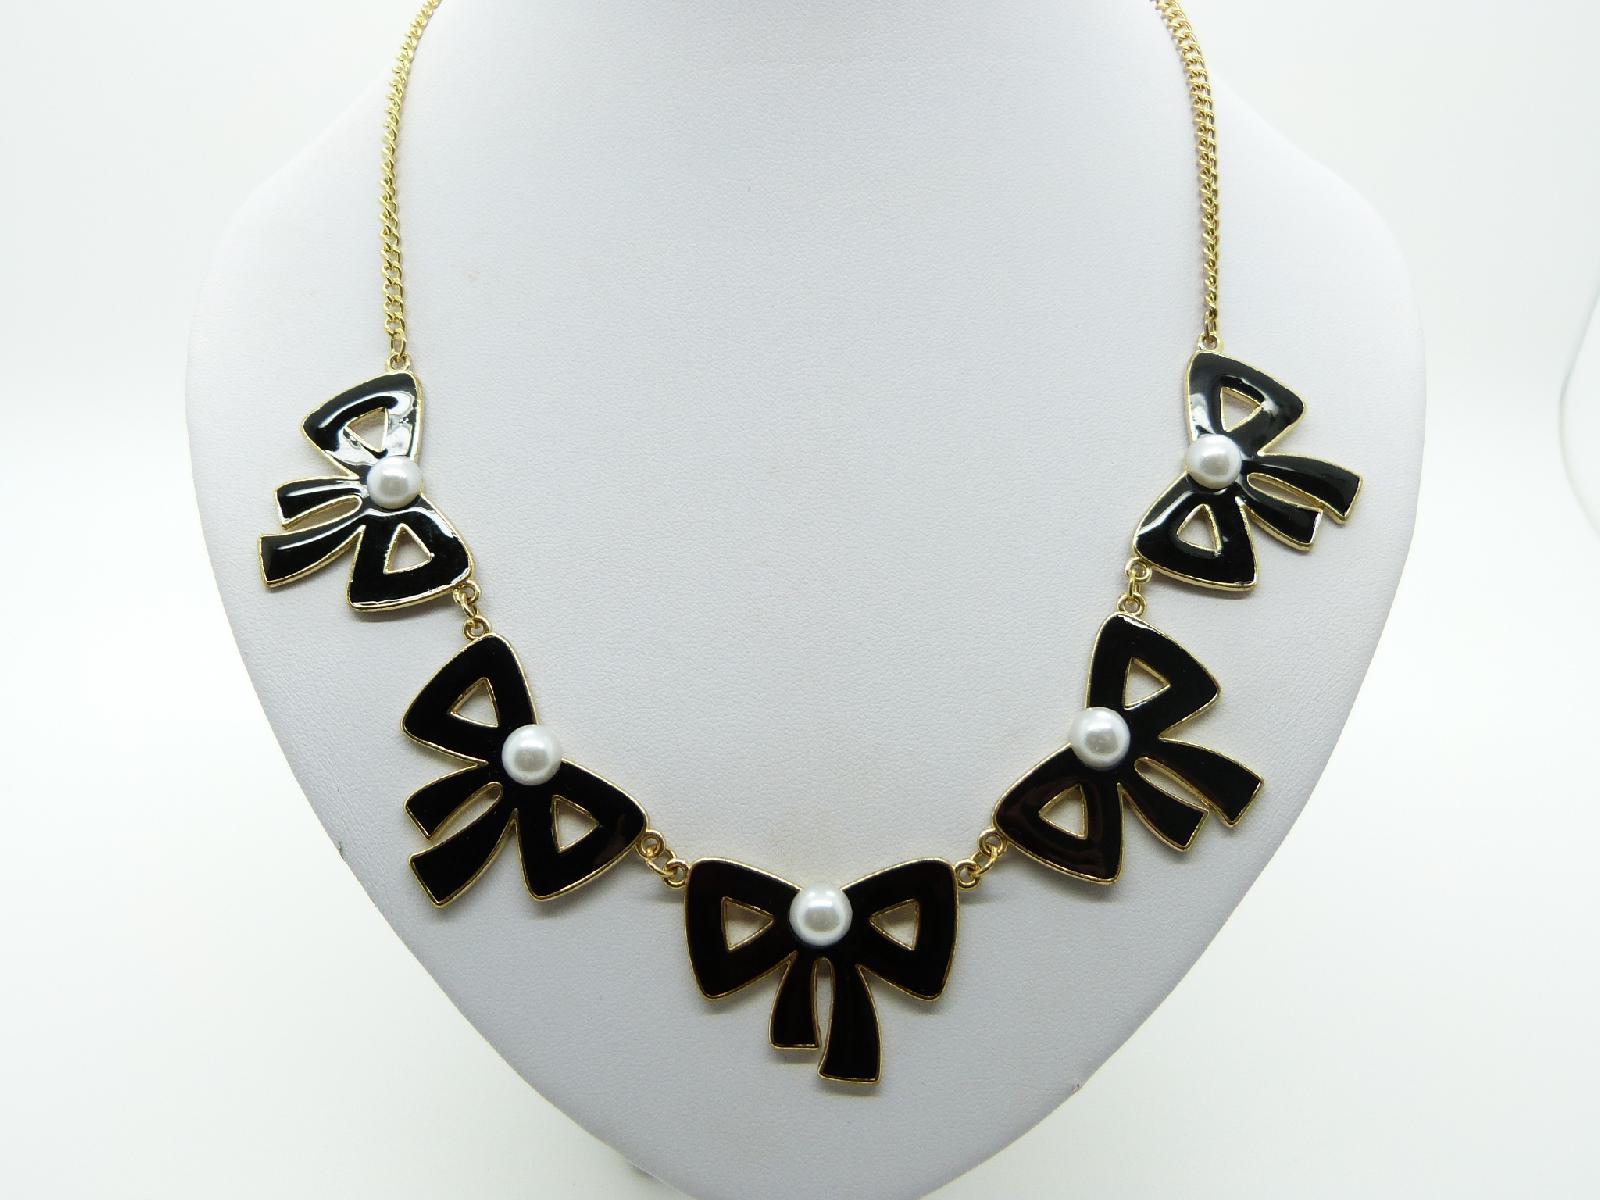 £14.00 - Vintage Inspired Black Enamel Bow and Faux Pearl Bead Goldtone Necklace 